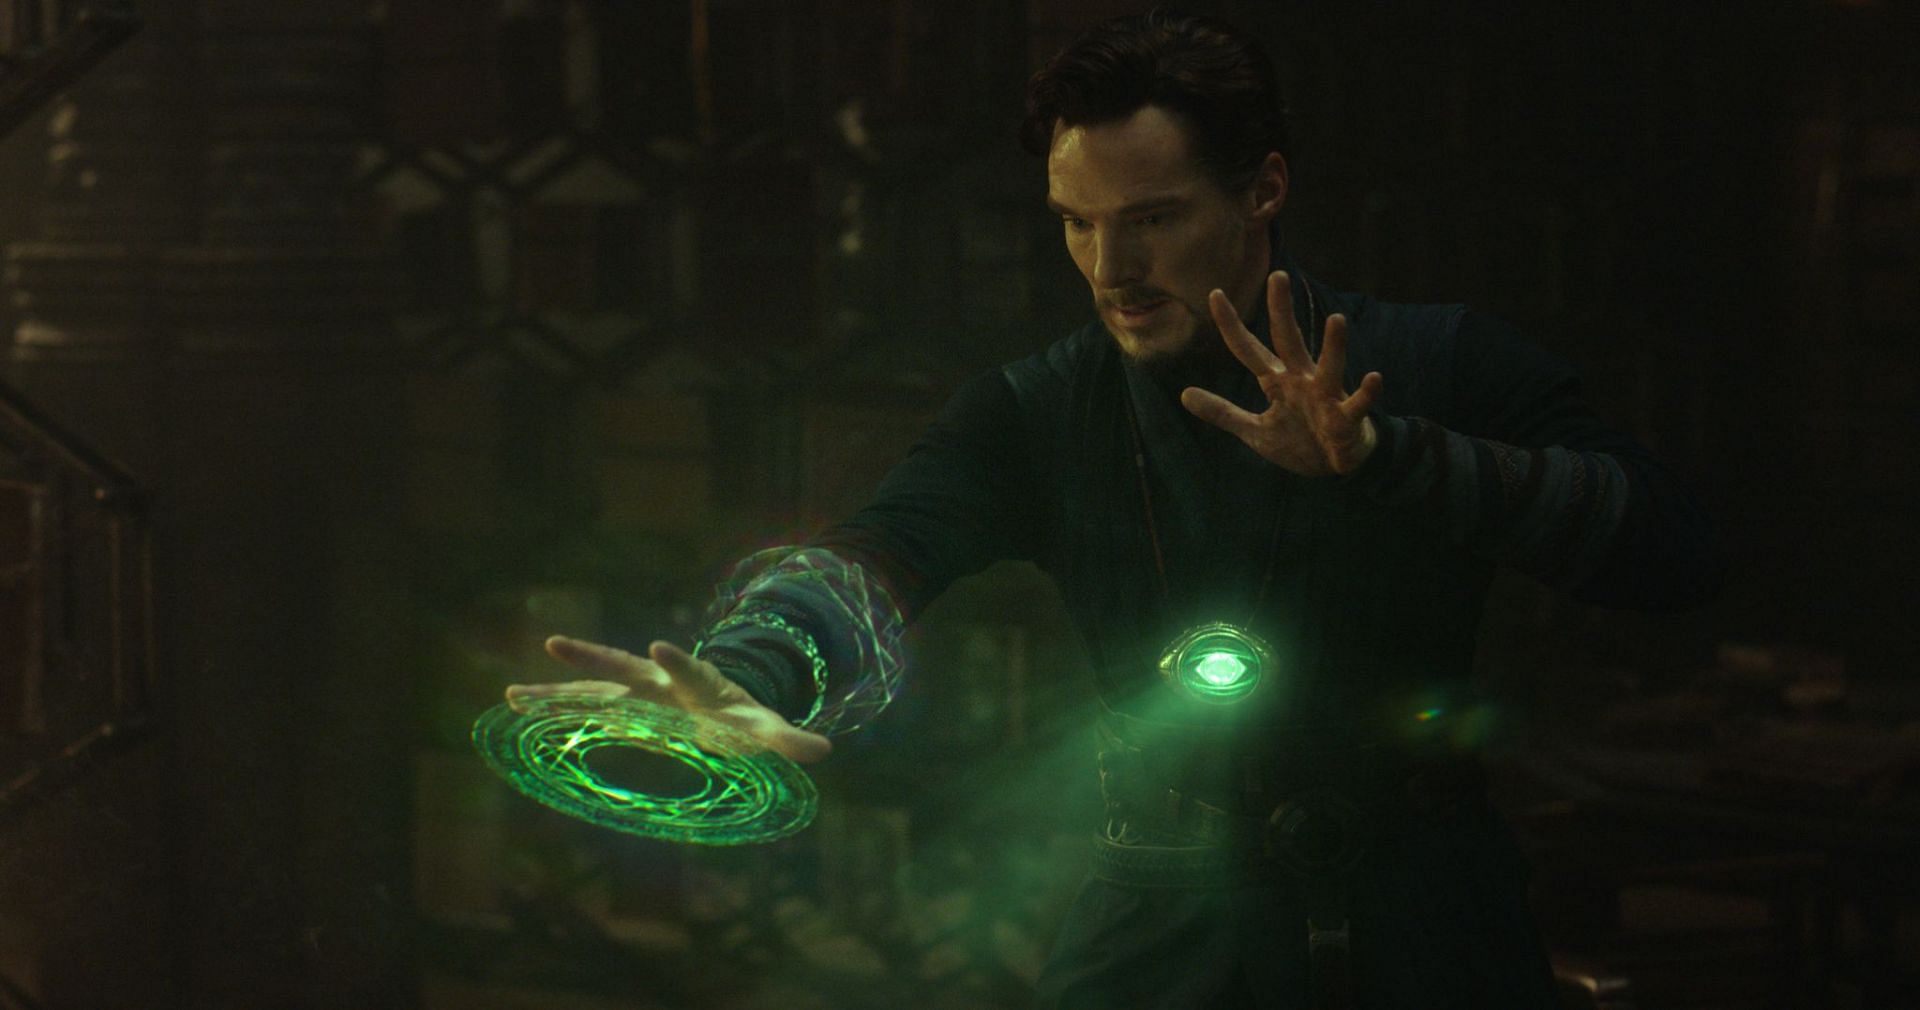 The Sorcerer Supreme - Doctor Strange can manipulate reality and the fabric of the universe, creating portals to other dimensions and possessing powerful telepathic and telekinetic abilities (Image via Marvel Studios)